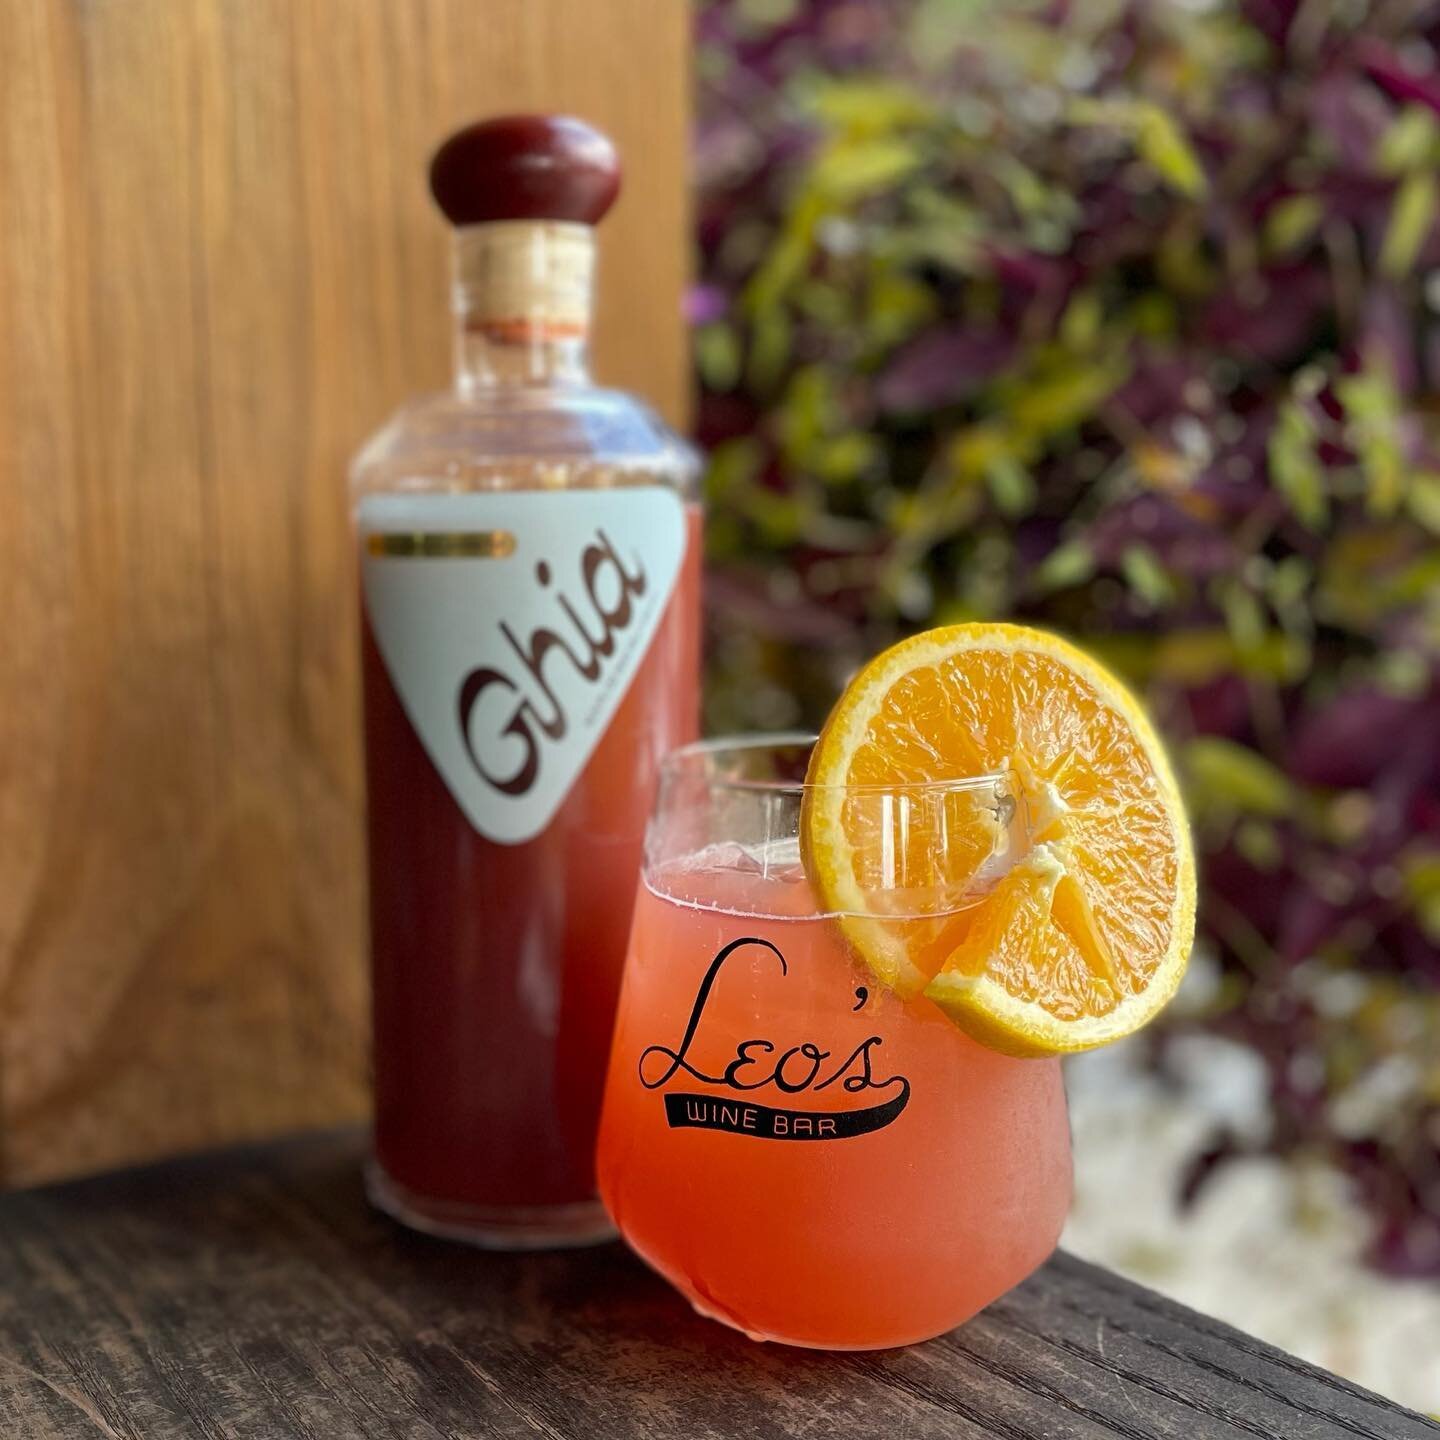 We are thrilled to now serve @drinkghia💥 Ghia is a super satisfying herbaceous zero proof aperitif which is just delightful with tonic. &ldquo;All of the spirit, none of the booze!&ldquo;👀